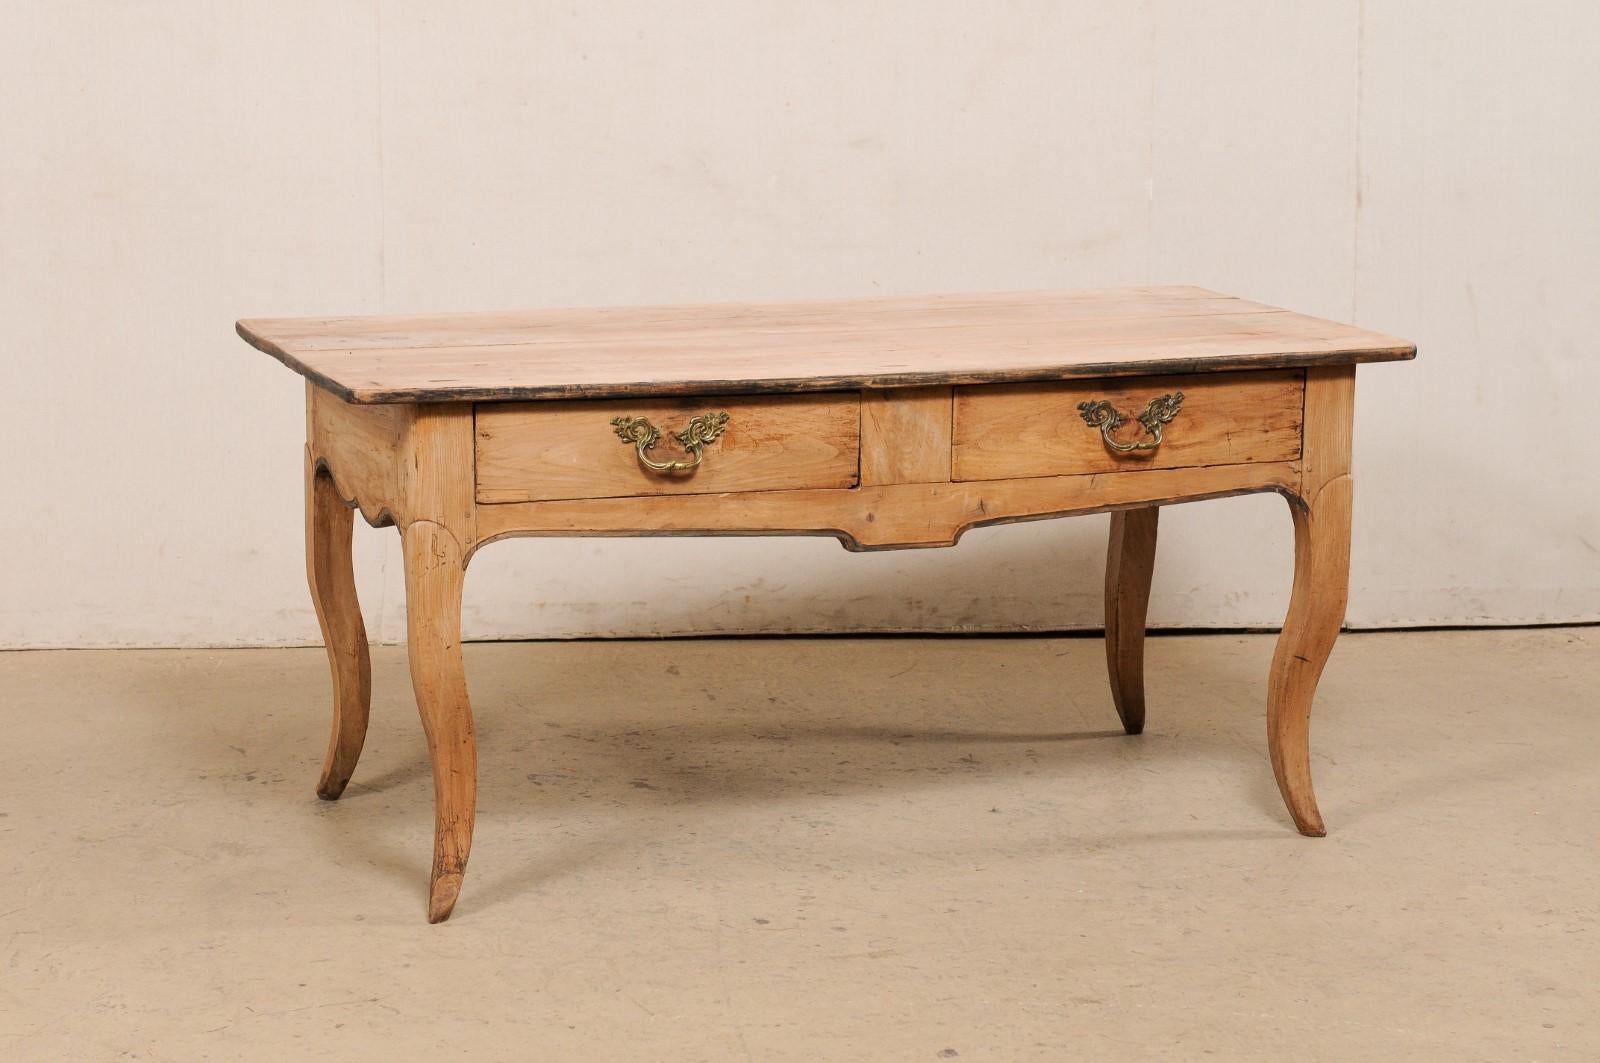 A French bleached wood large console table with two drawers from the 19th century. This antique table from France features a rectangular-shaped top which rests atop an apron which houses a pair of drawers at one long side, and is presented upon